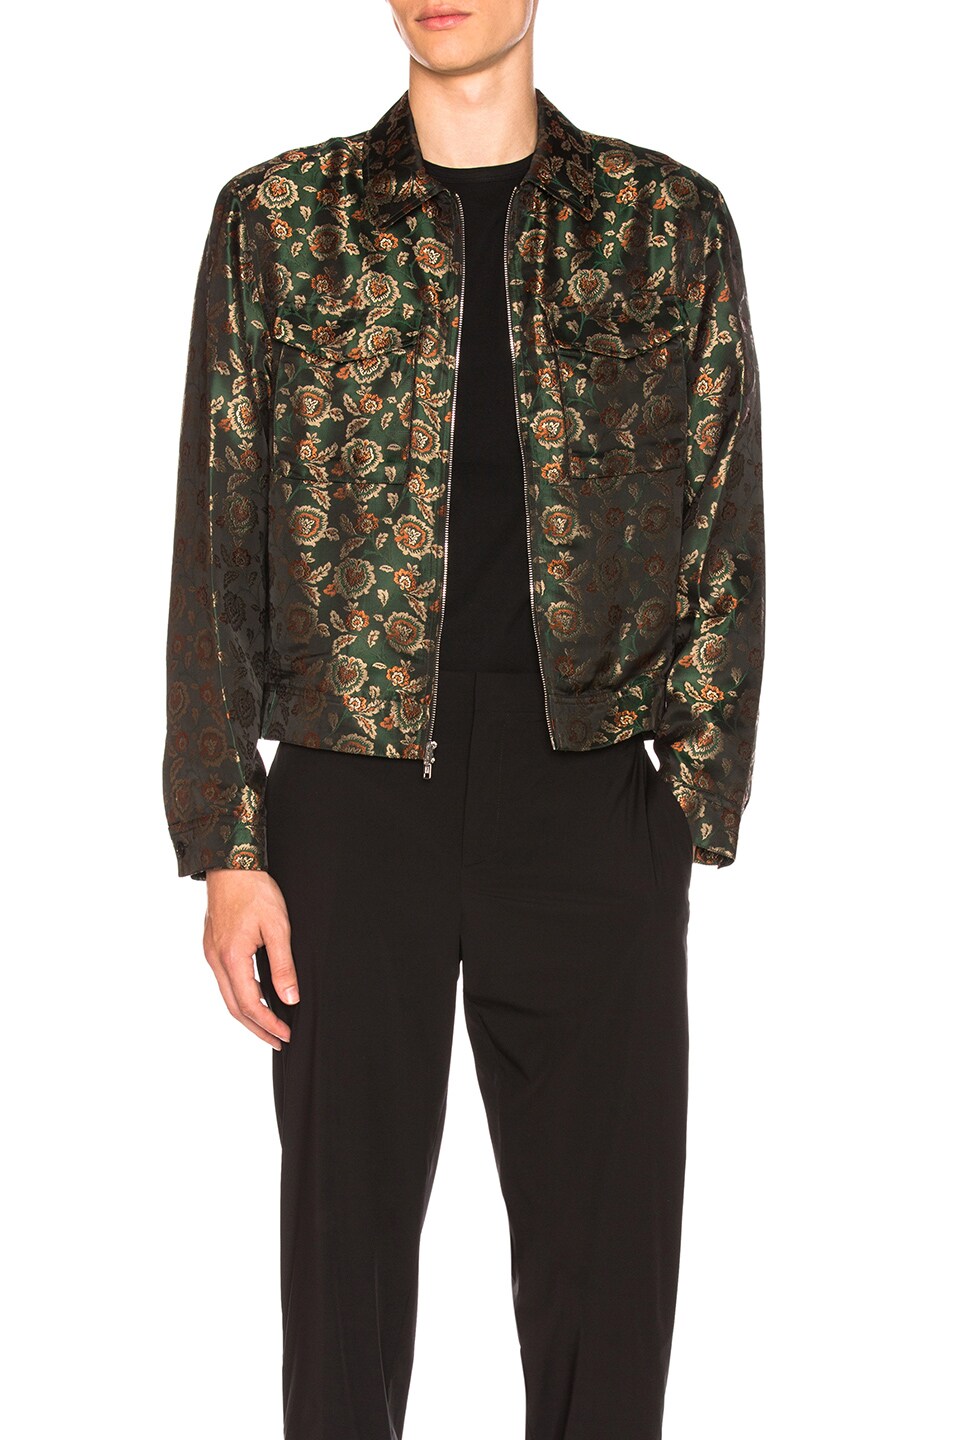 Image 1 of 3.1 phillip lim Bowler Jacket in Evergreen